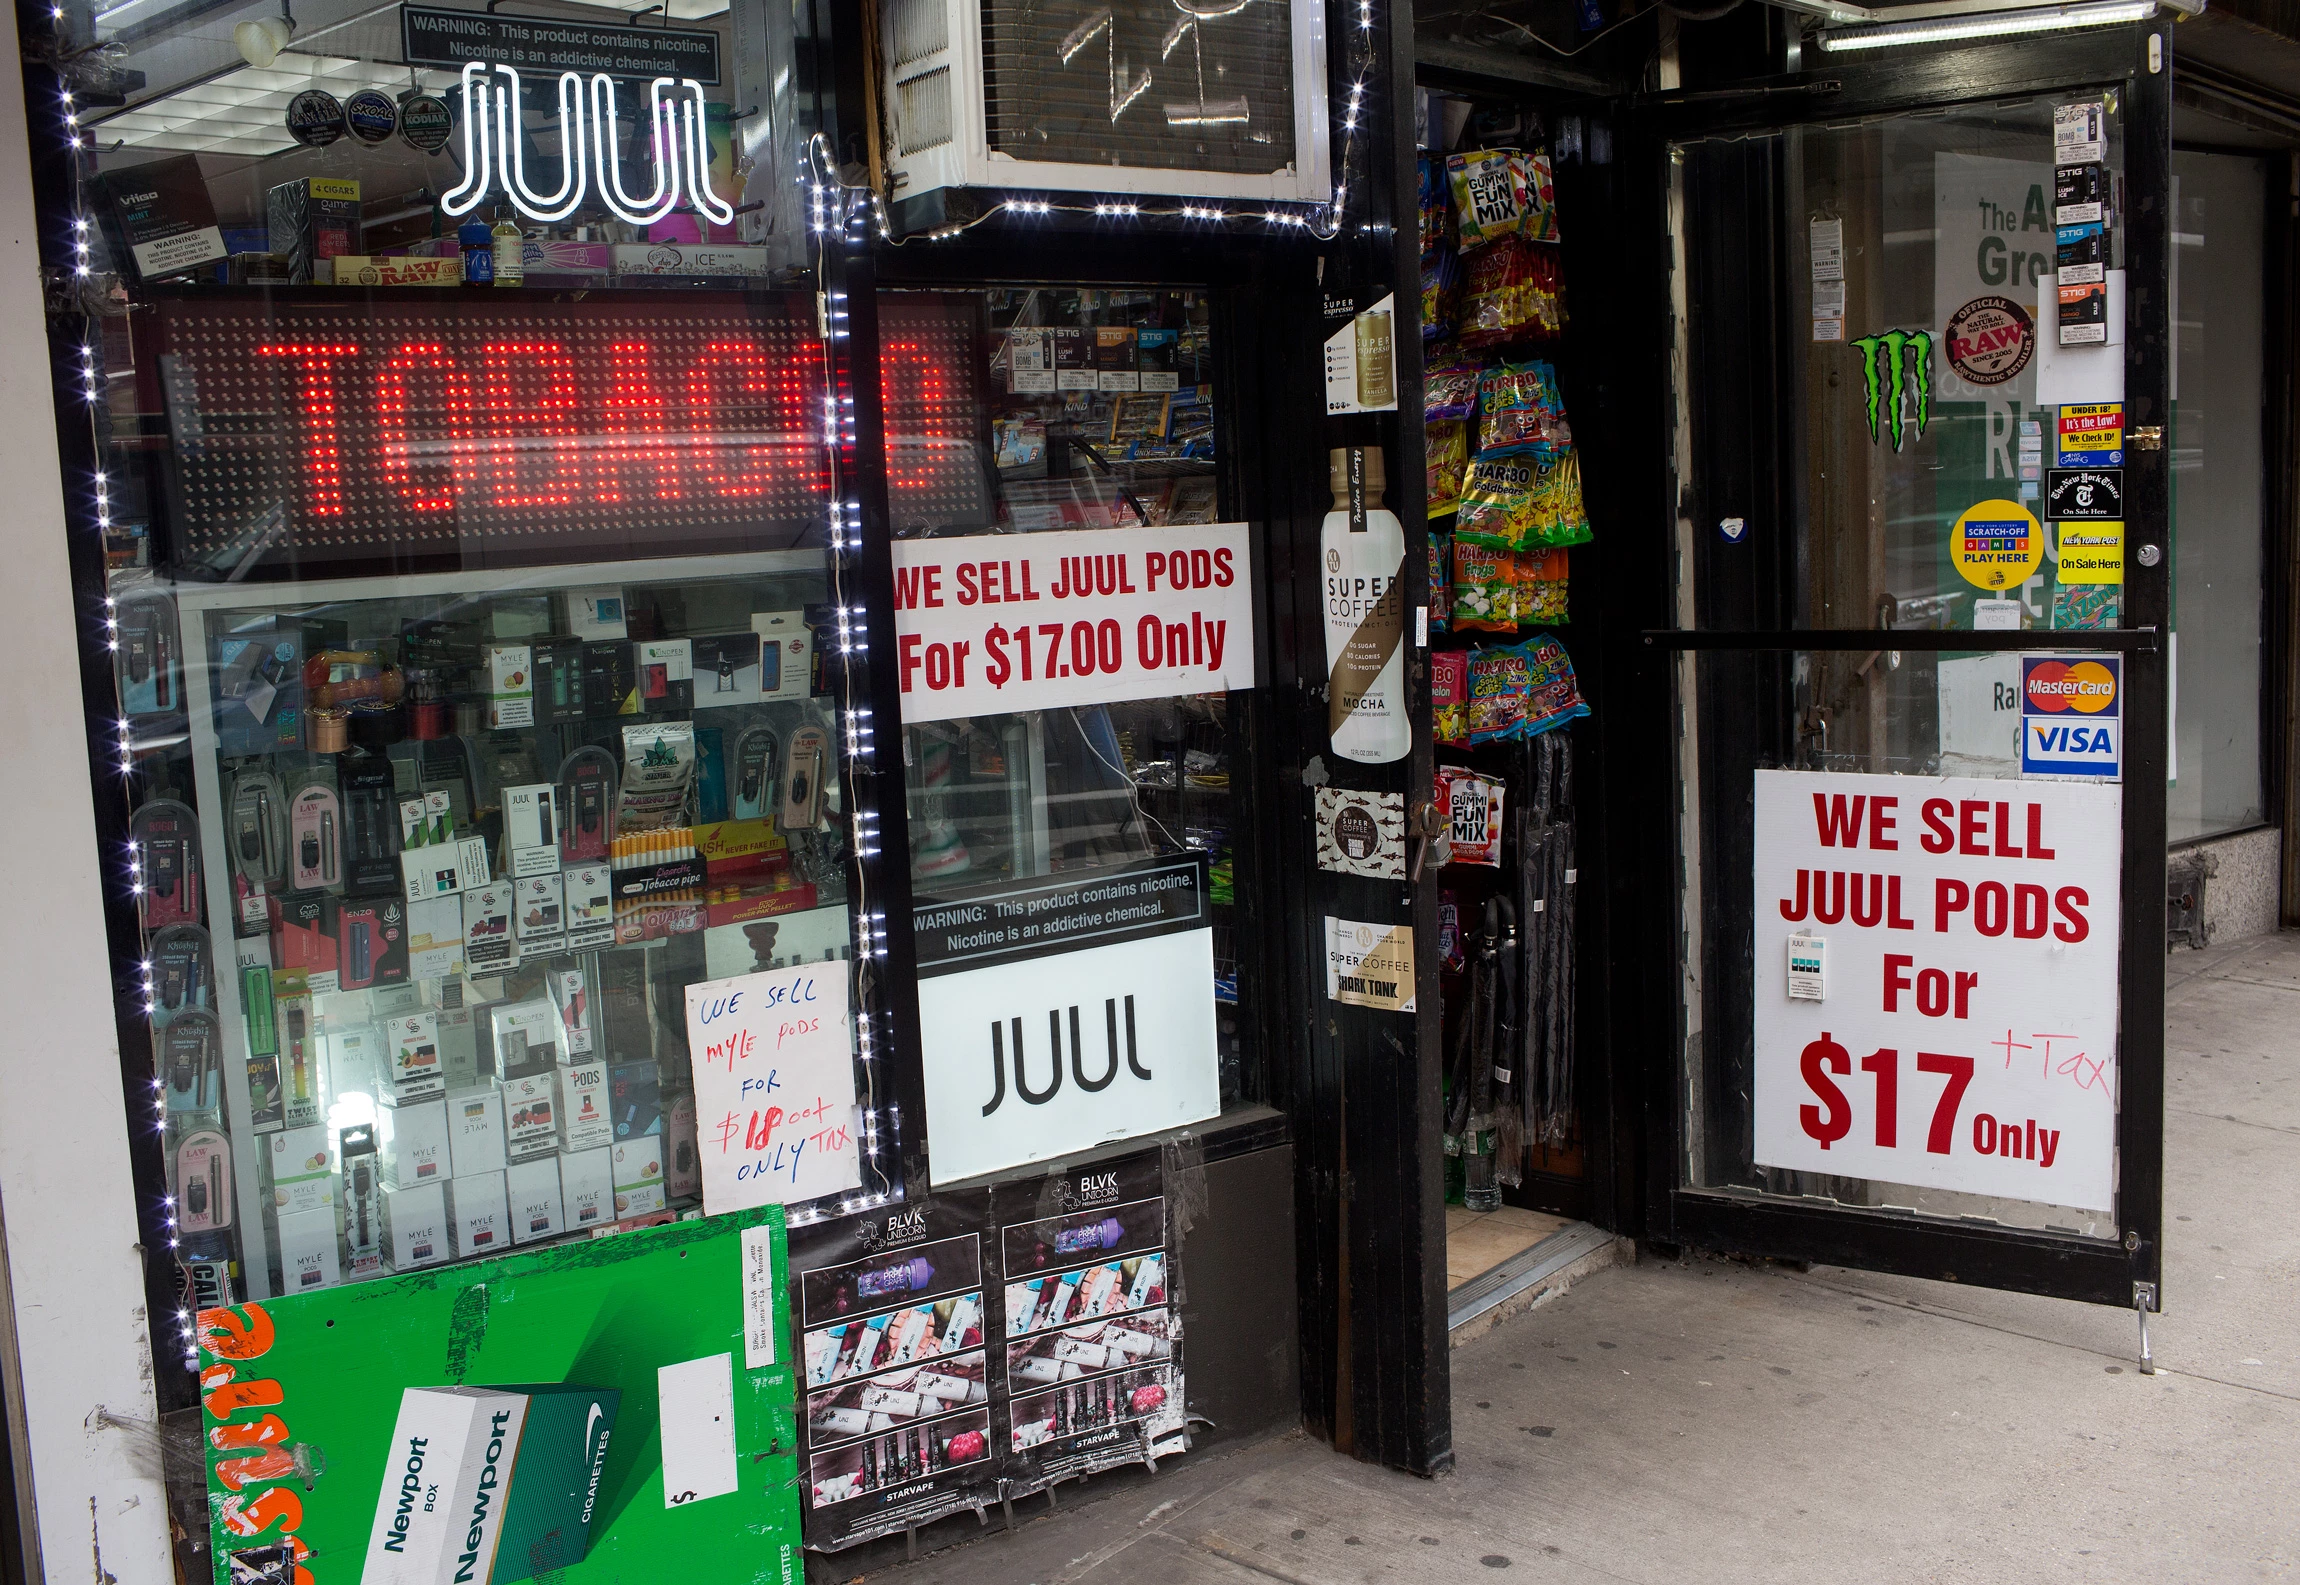 NEW YORK, NEW YORK - JANUARY 27: A tobacco store advertises and sells Juul tobacco products as vaping remains popular despite health warnings, on January 27, 2020 in midtown Manhattan, New York City. (Photo by Andrew Lichtenstein/Corbis via Getty Images)